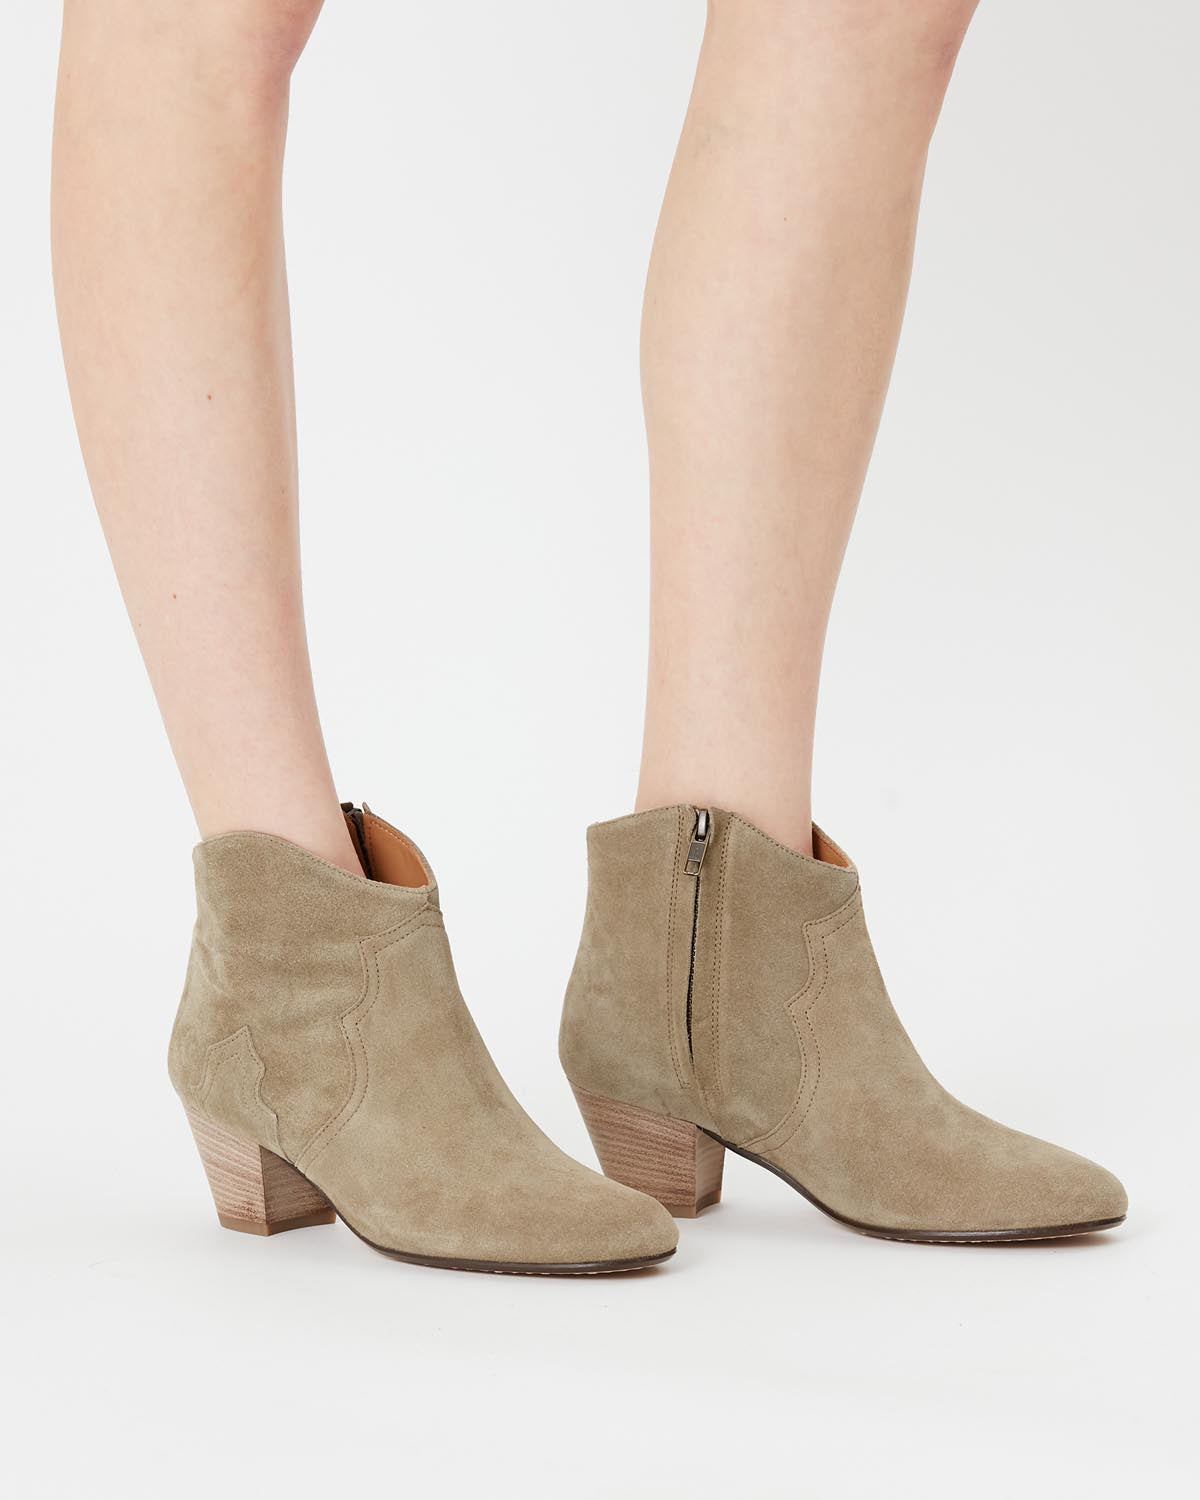 Boots dicker Woman Taupe 4